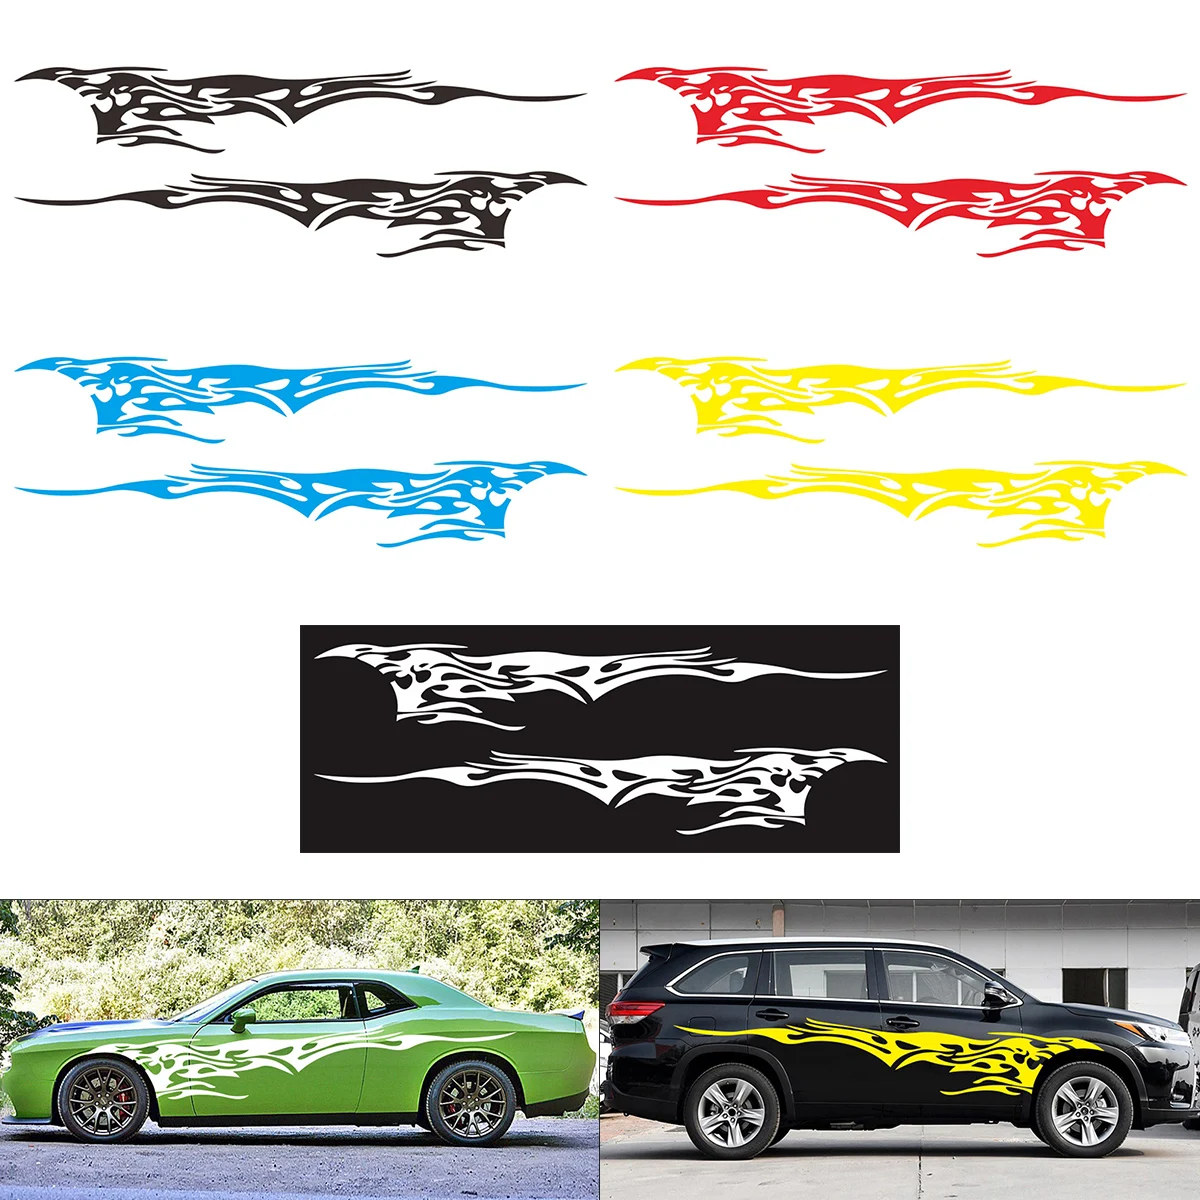 

1pc Universal Car Sticker Fire Flame Whole Boby Decoration Vinyl Decals Truck Car styling Decoration Car Exterior Accessories